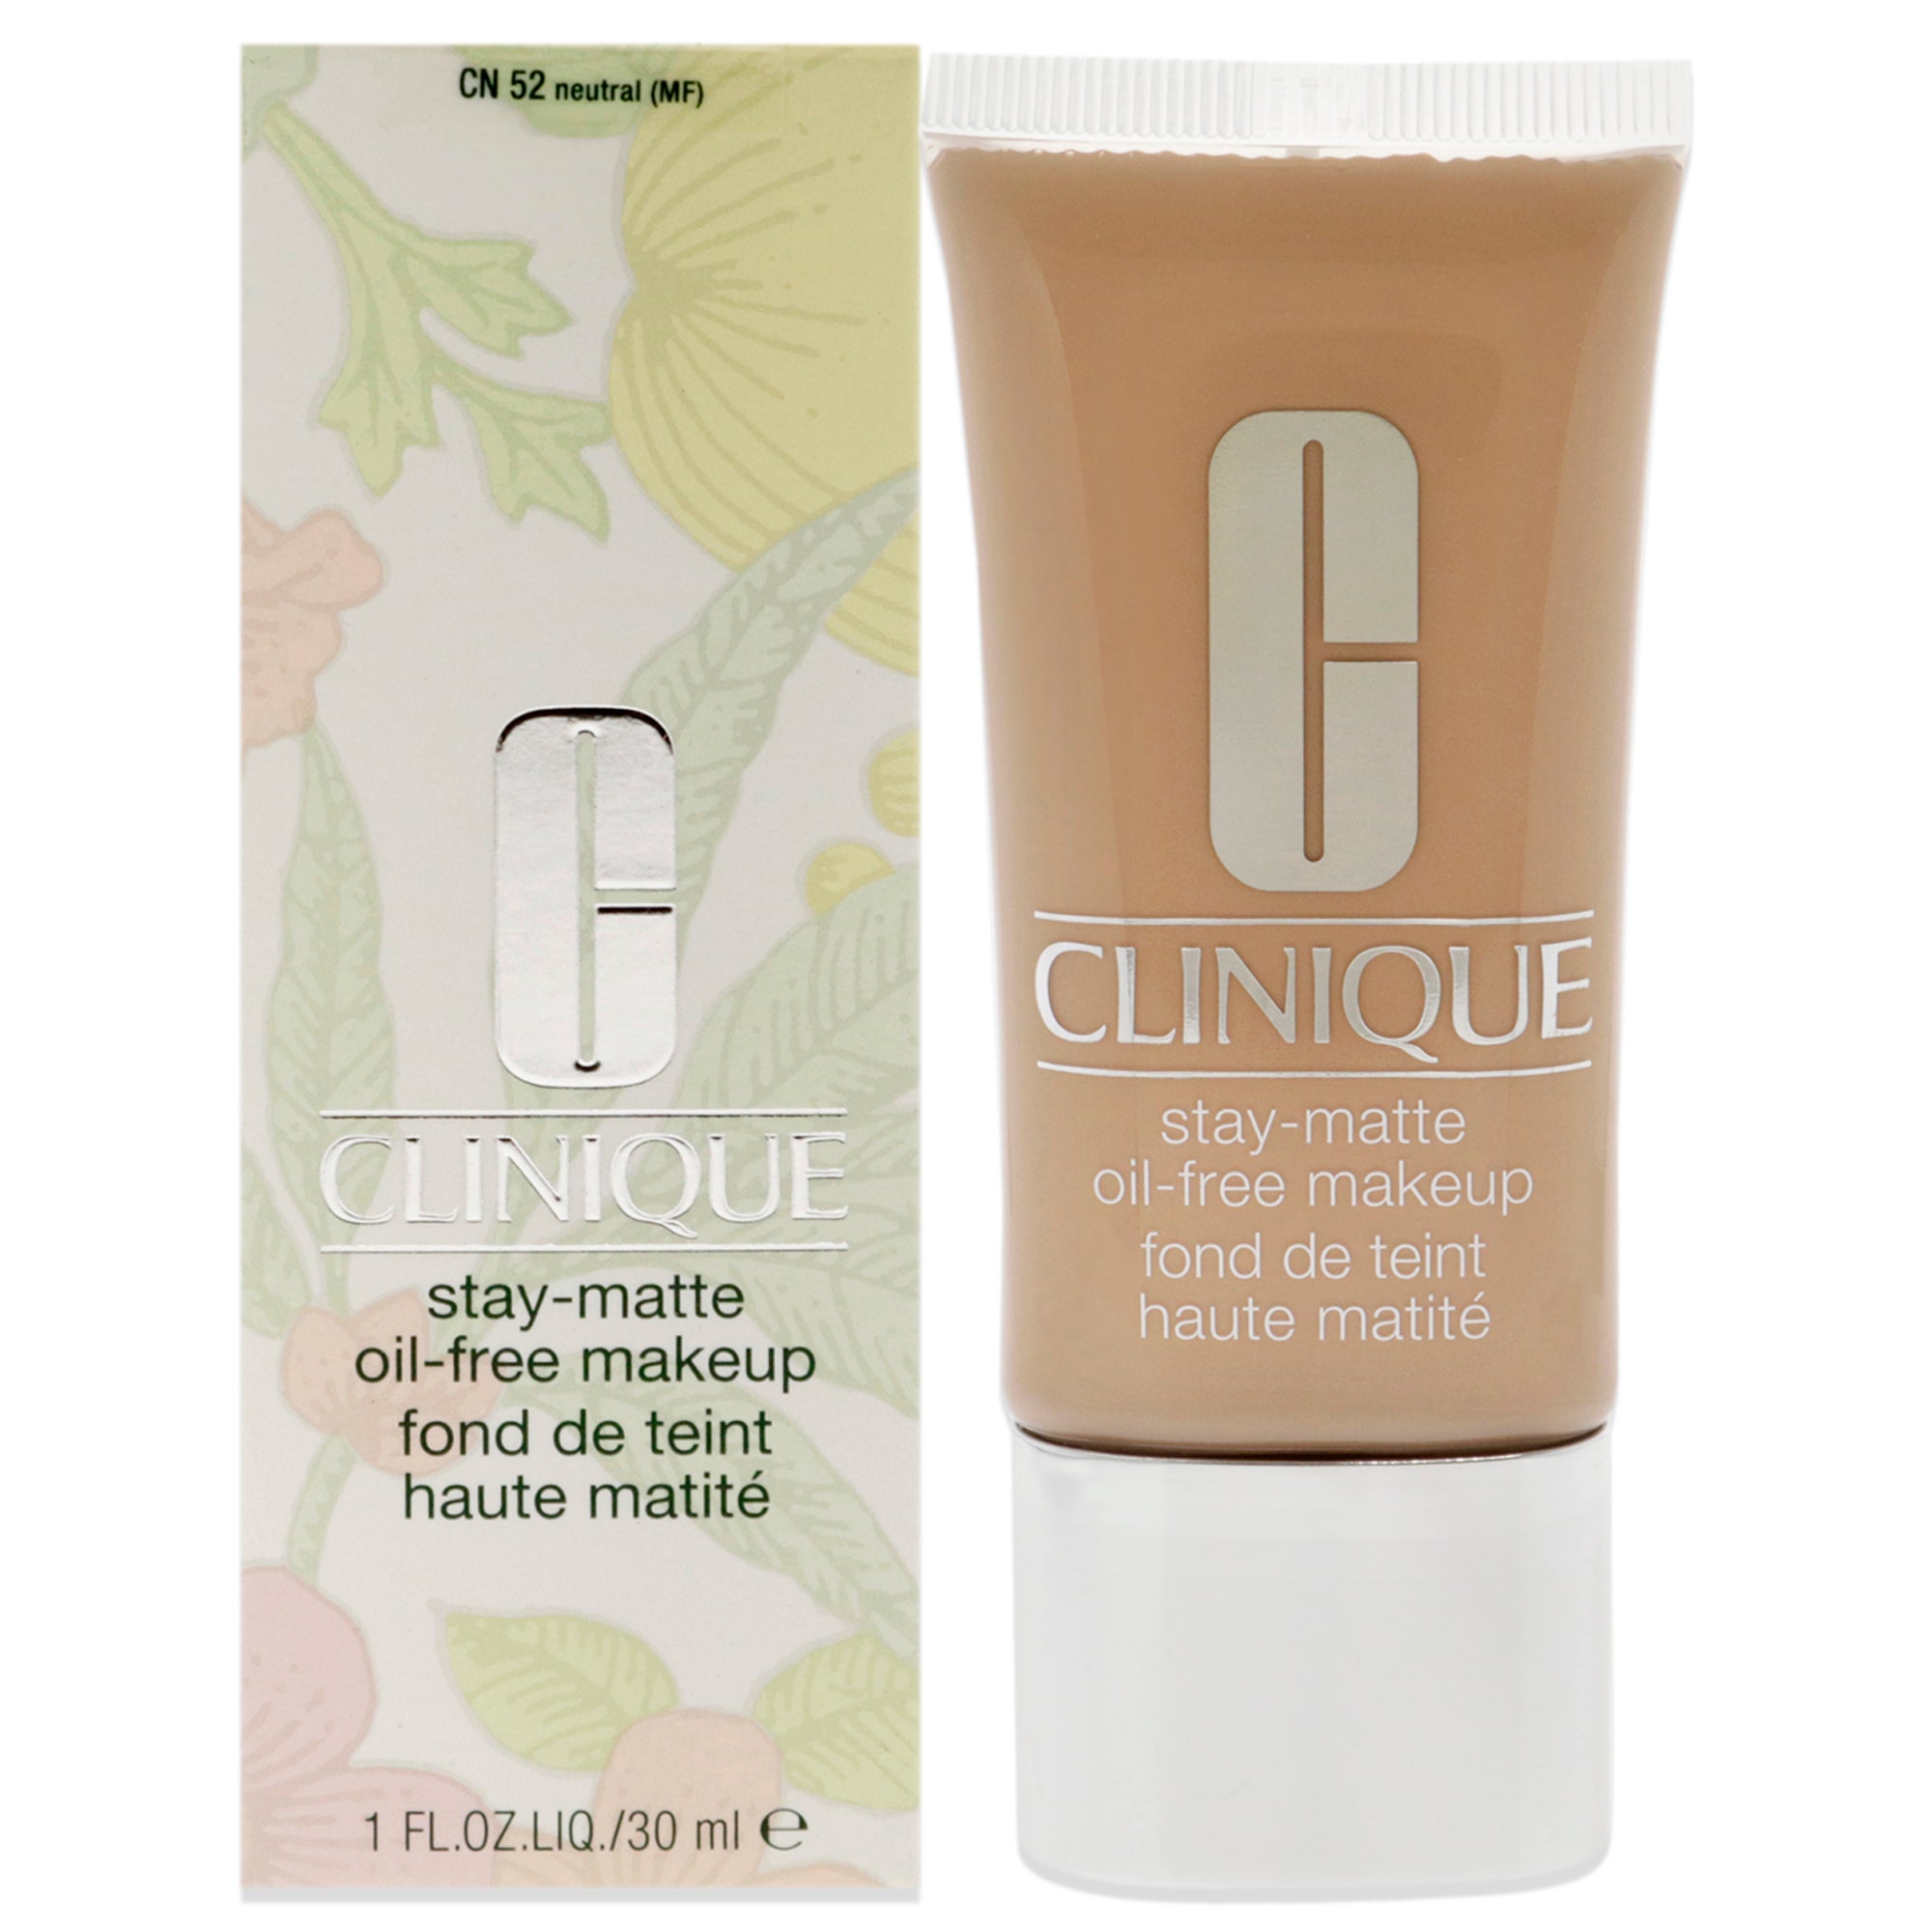 Stay-Matte Oil-Free Makeup - # 9 Neutral MF-N - Dry Combination To Oily by Clinique for Women - 1 oz Makeup